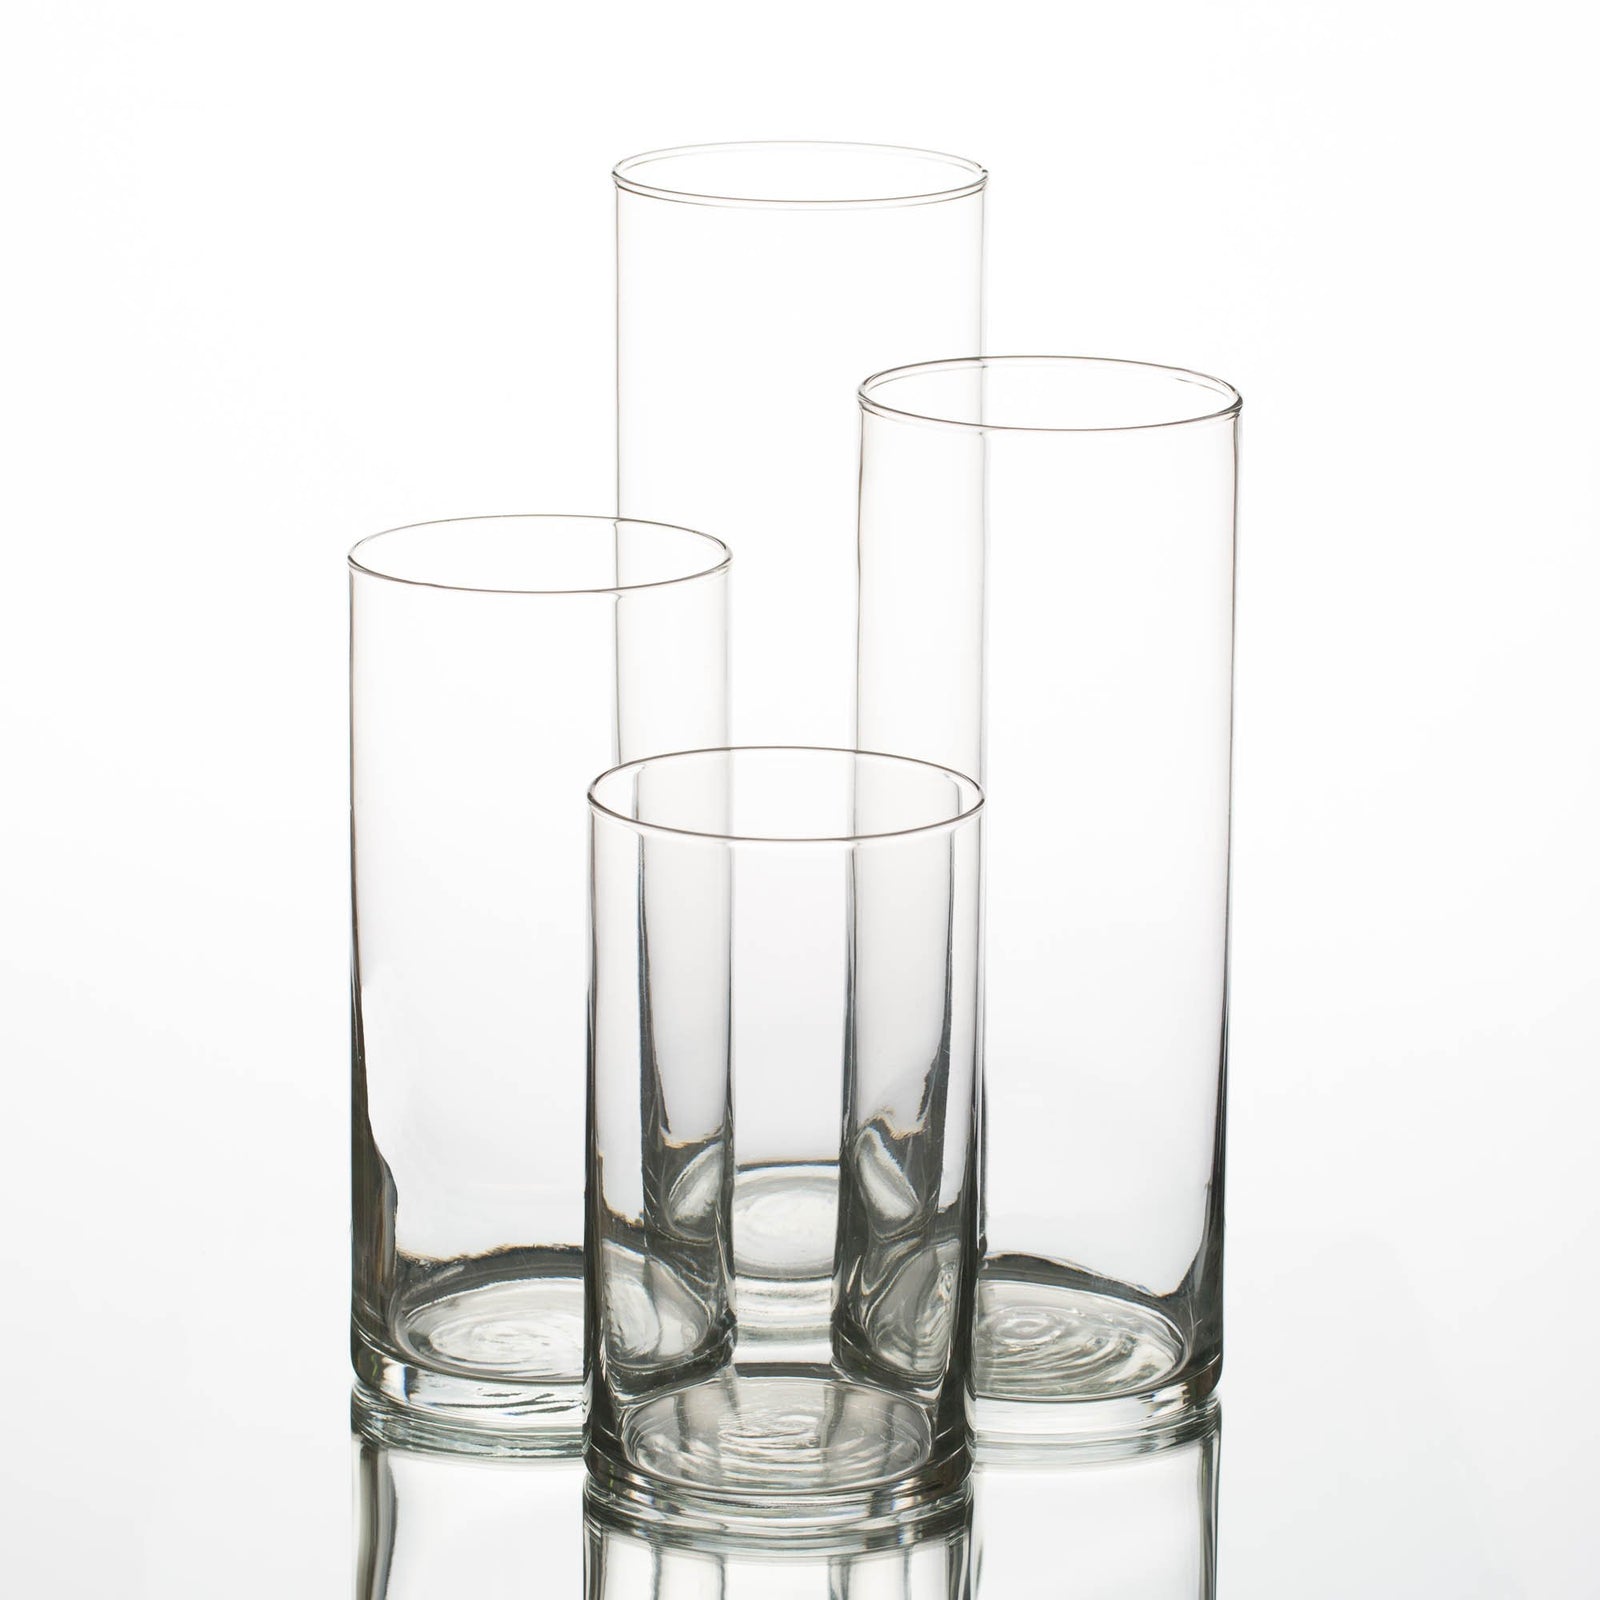 Eastland Square Mirror and Cylinder Vase Centerpiece with Richland